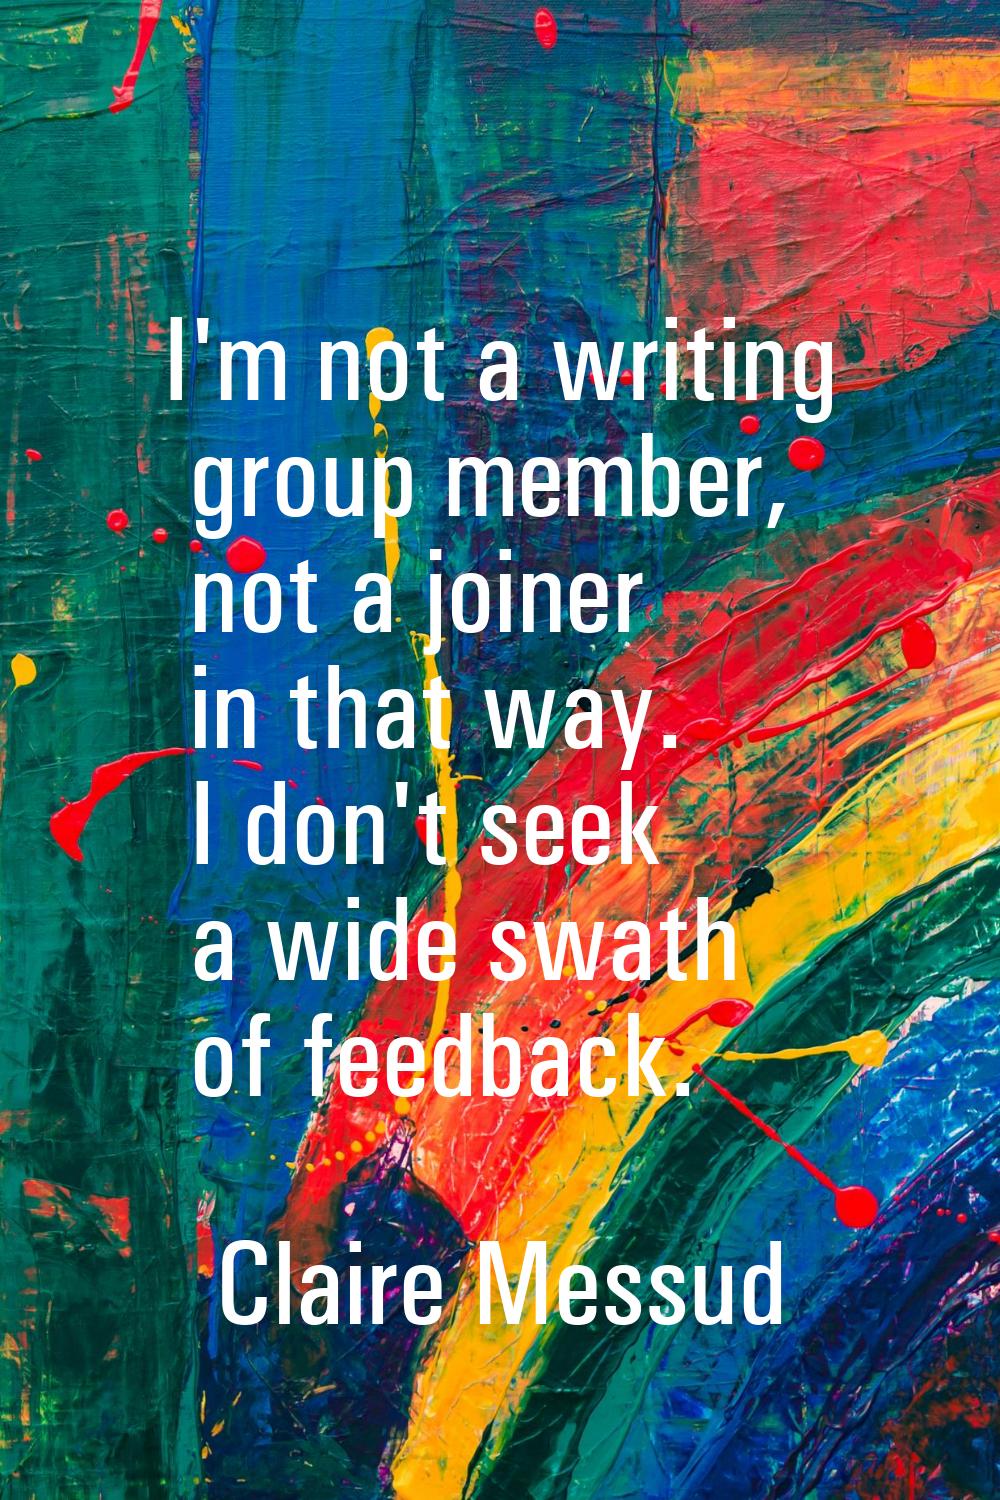 I'm not a writing group member, not a joiner in that way. I don't seek a wide swath of feedback.